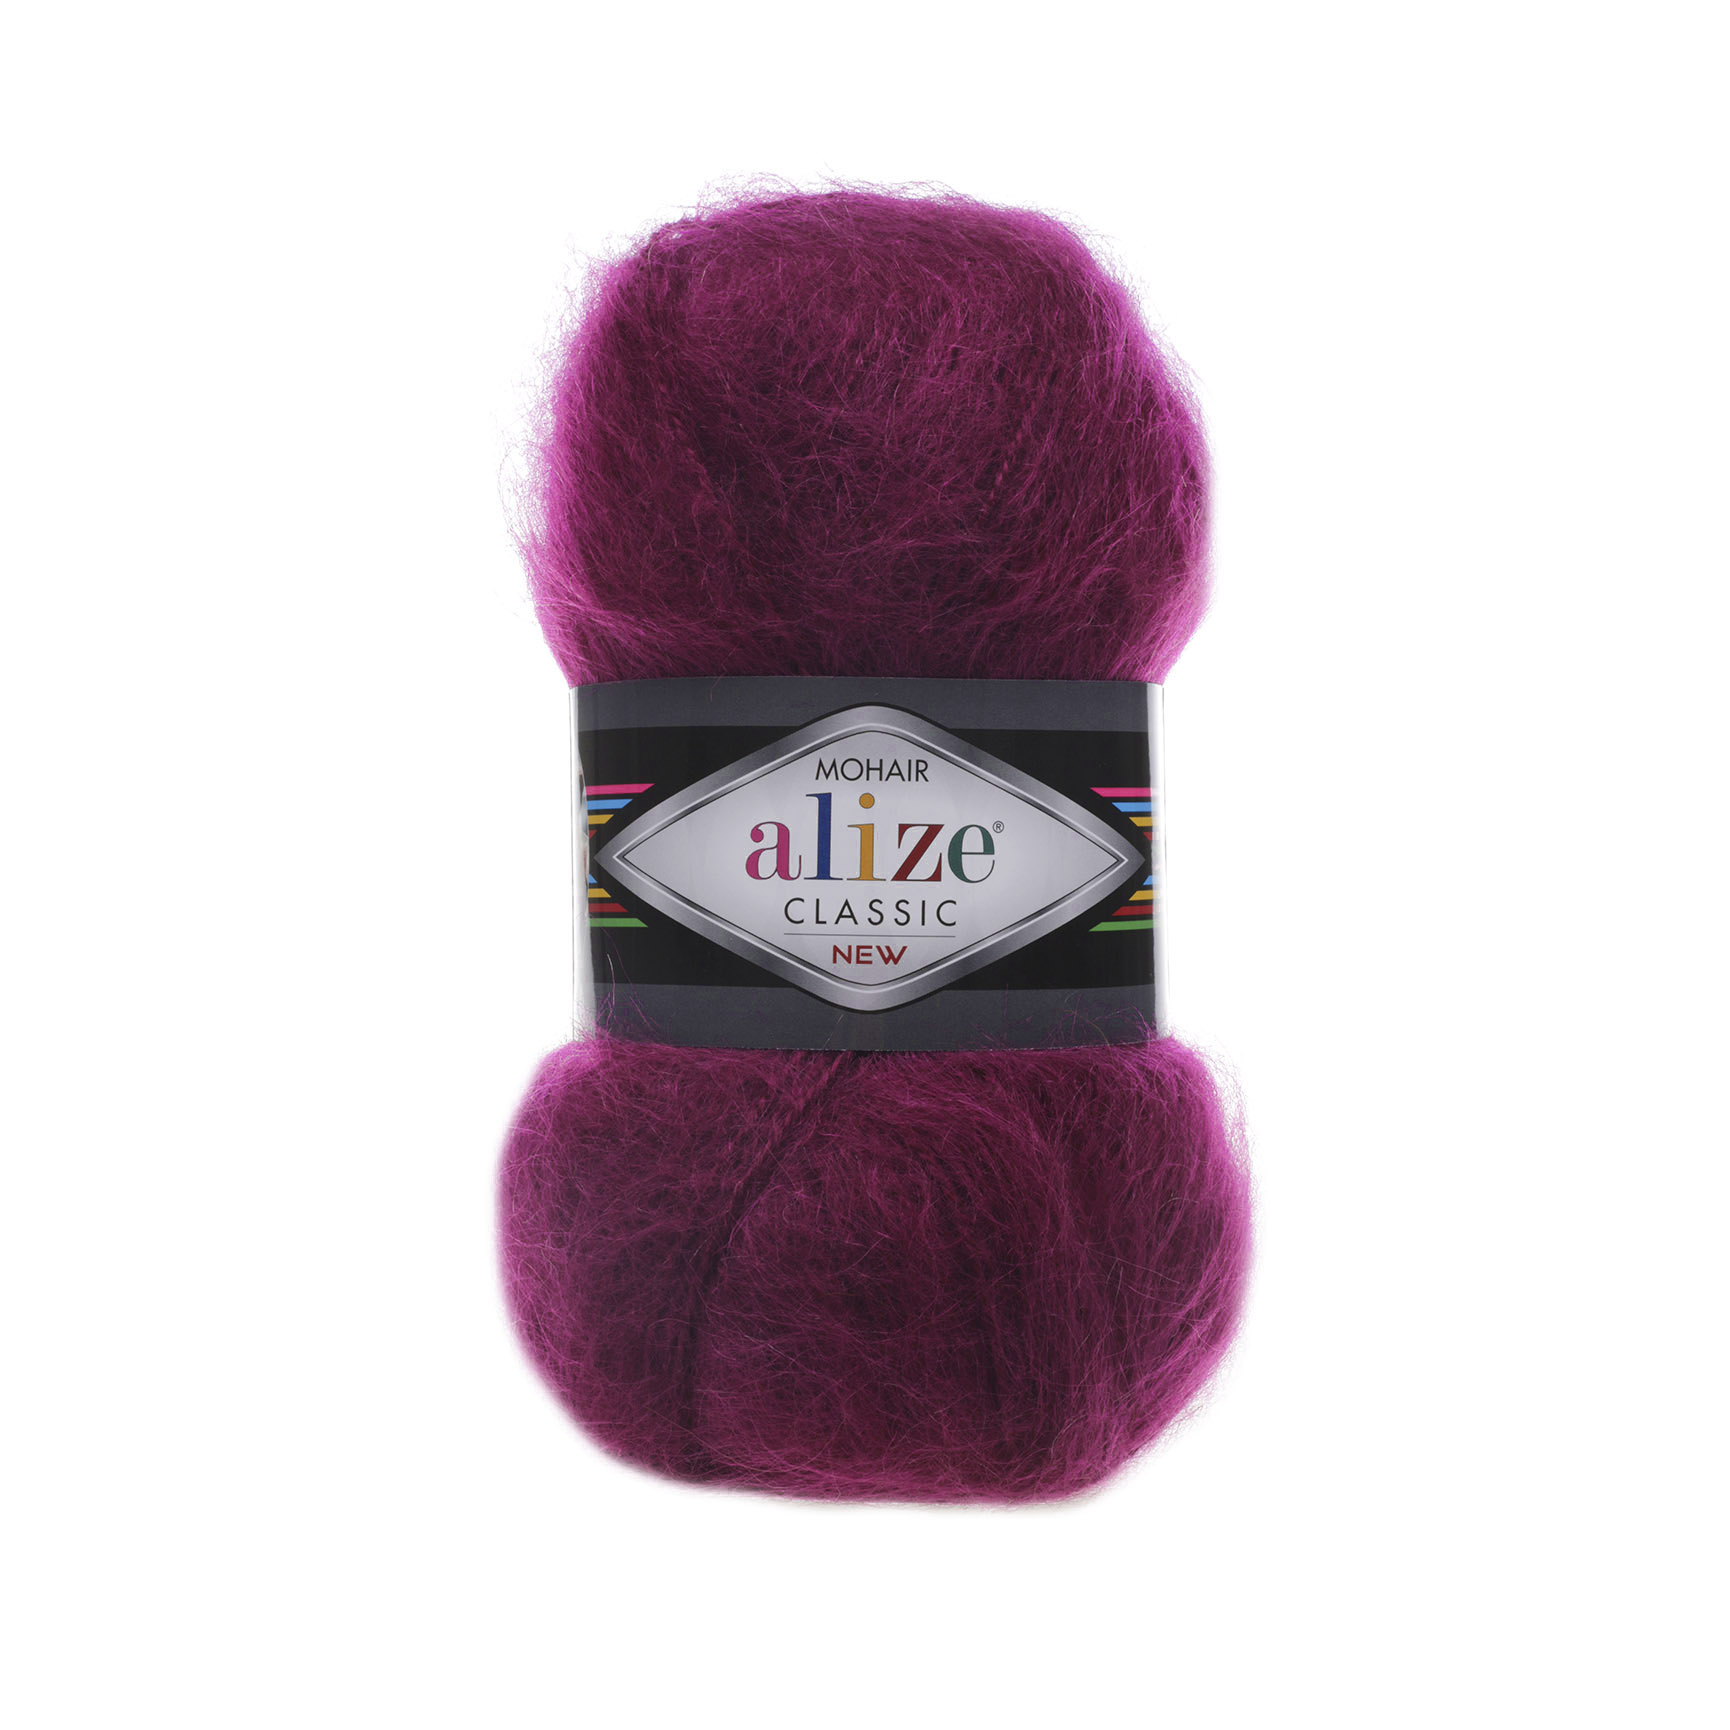 Mohair classik New 447 астра